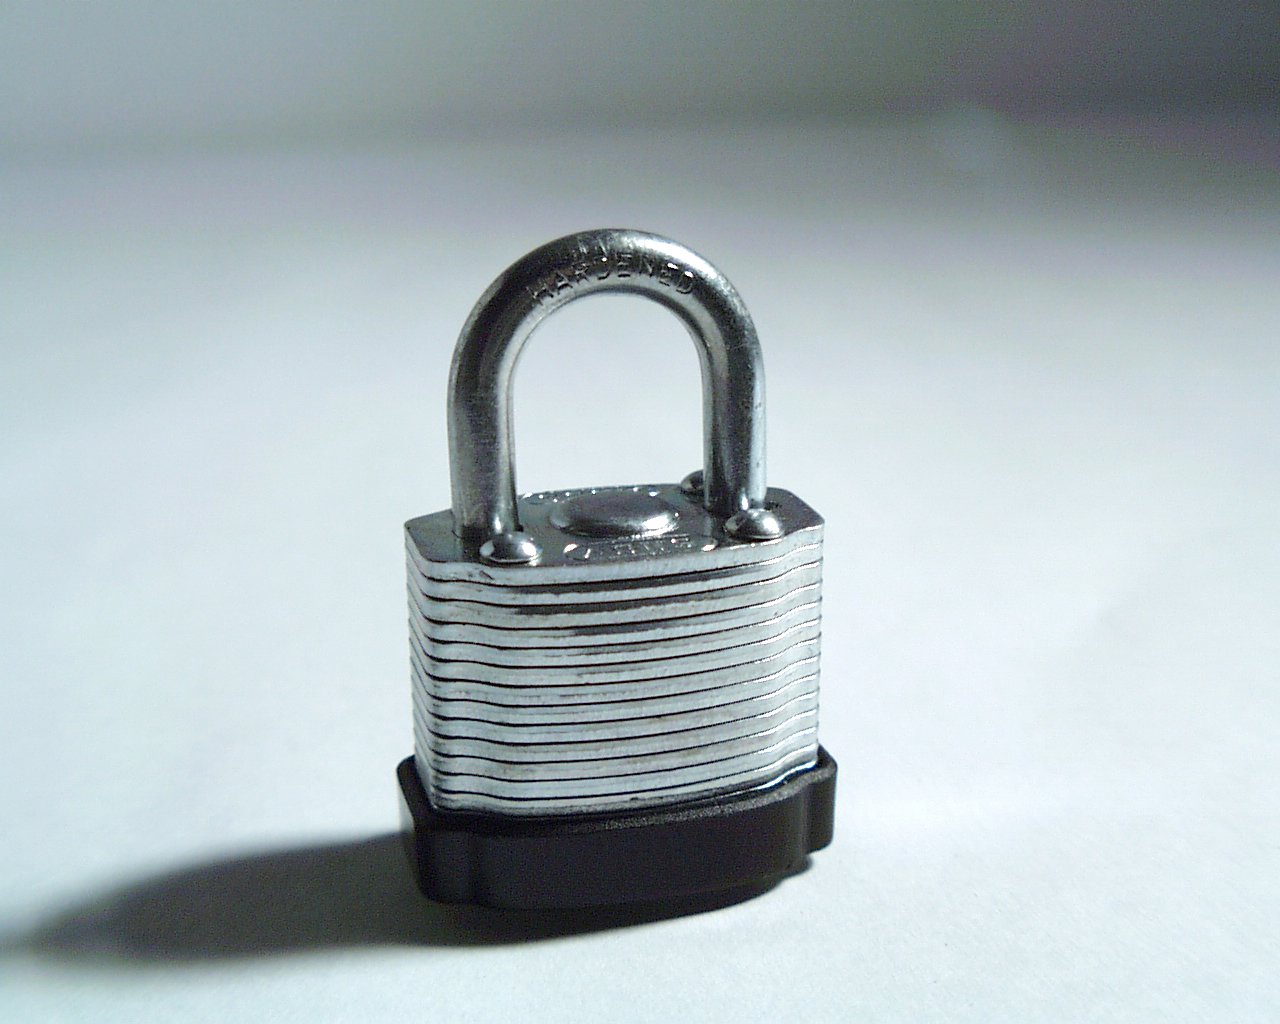 Increase Your Web Database Security